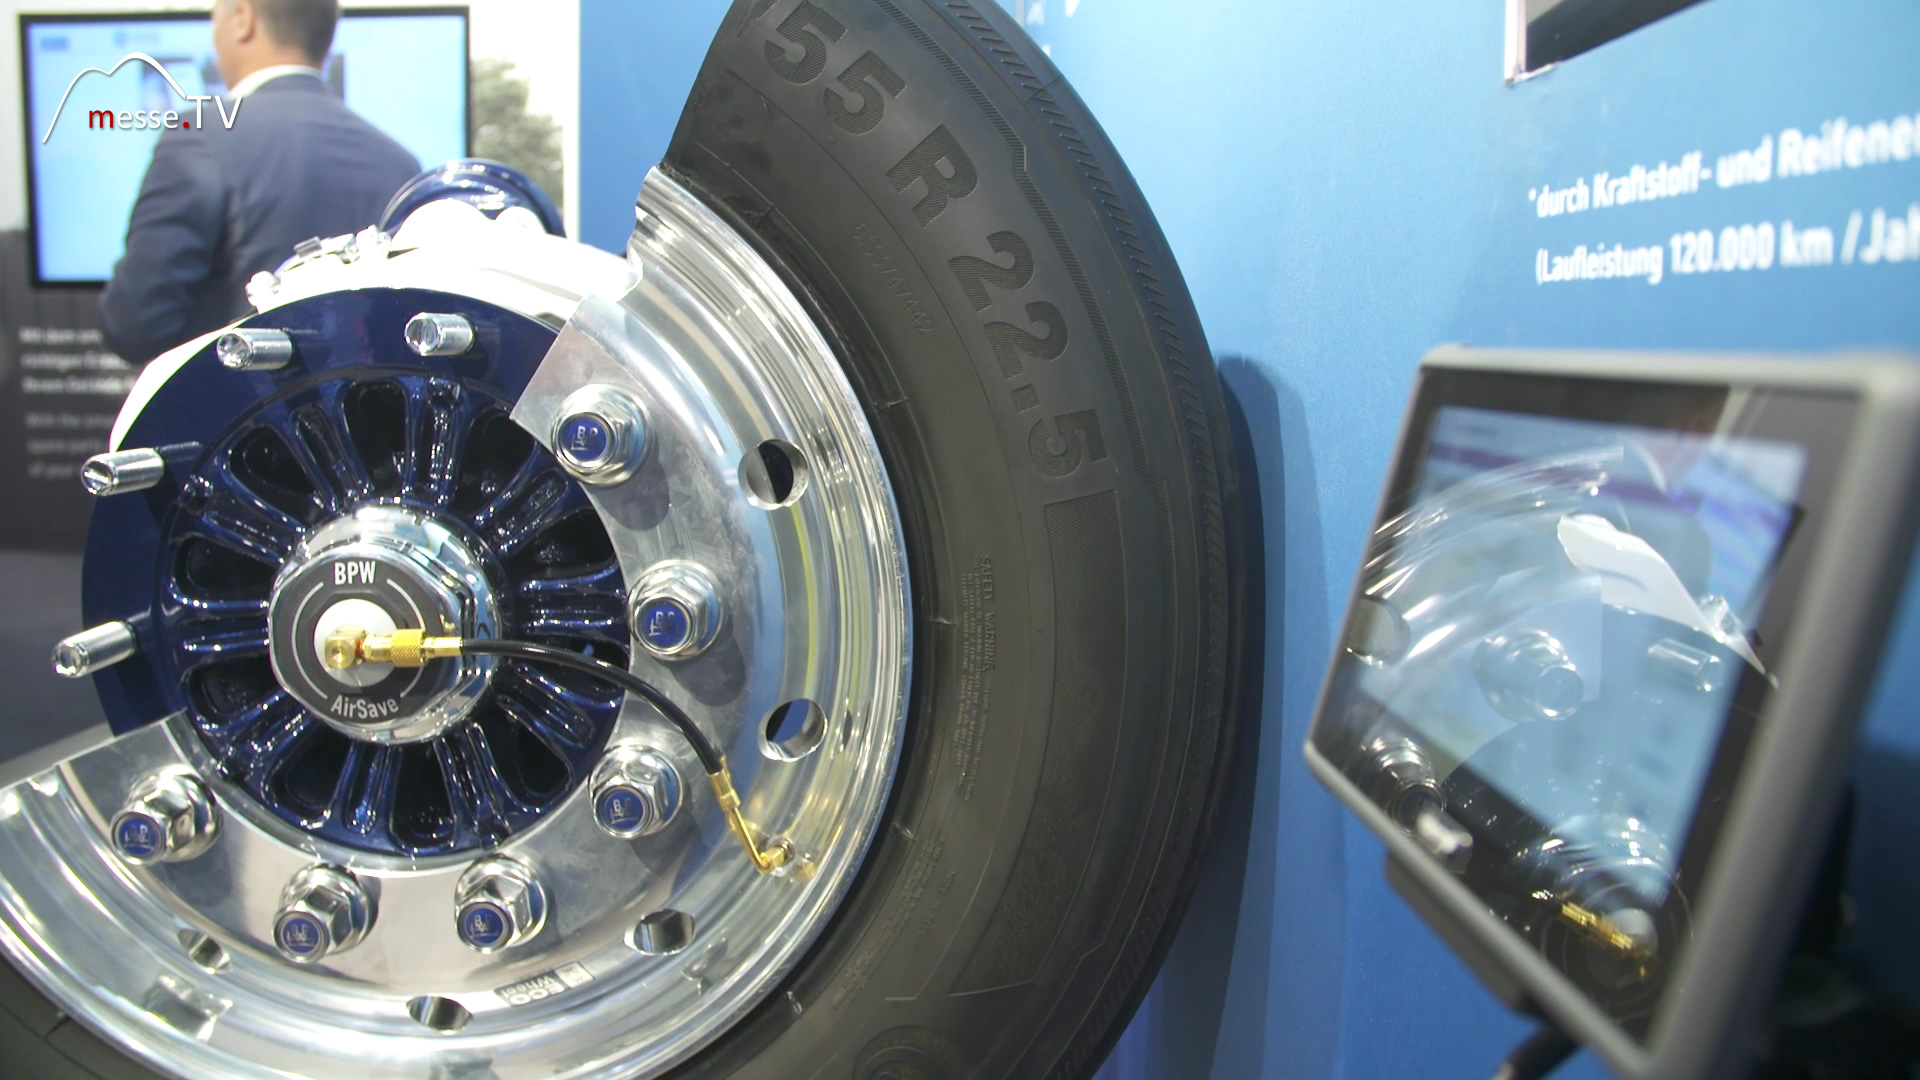 BPW AirSafe with correct truck tire pressure cost saving transport logistic Munich Trade Fair